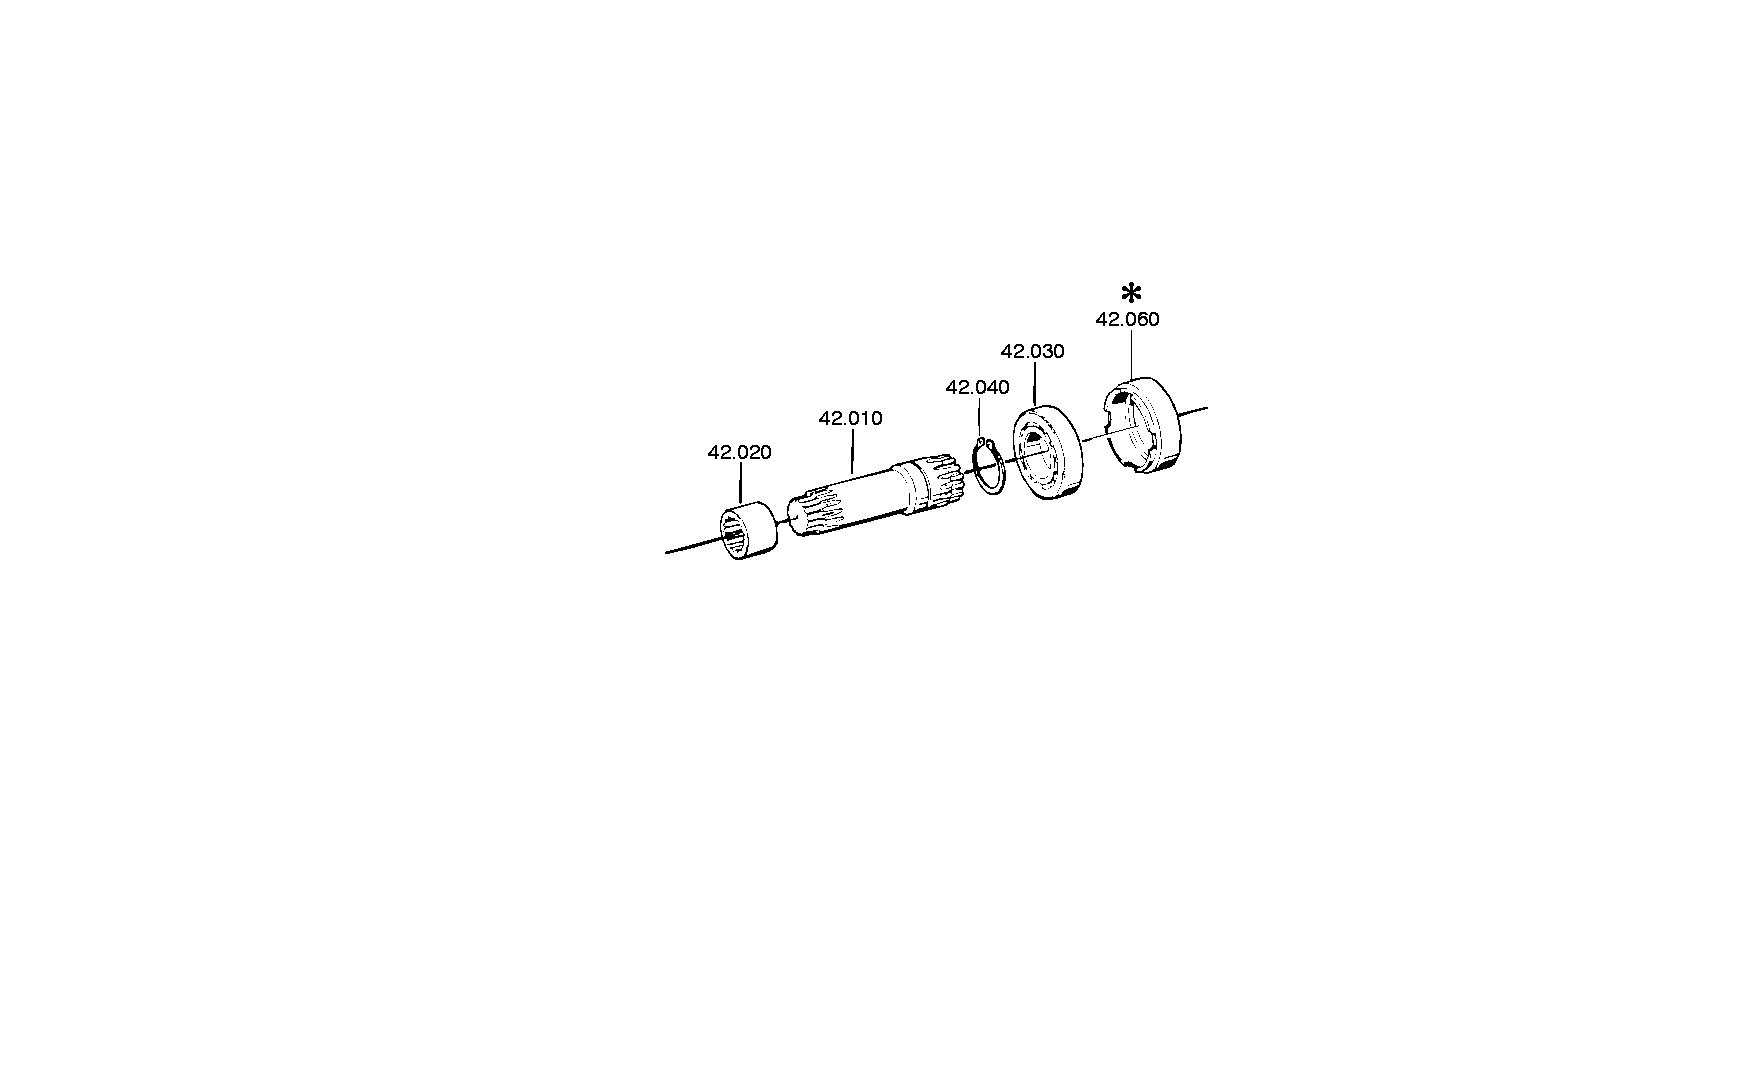 drawing for DAF TRUCKS NV 0000167404 - CONNECTING PARTS (figure 1)